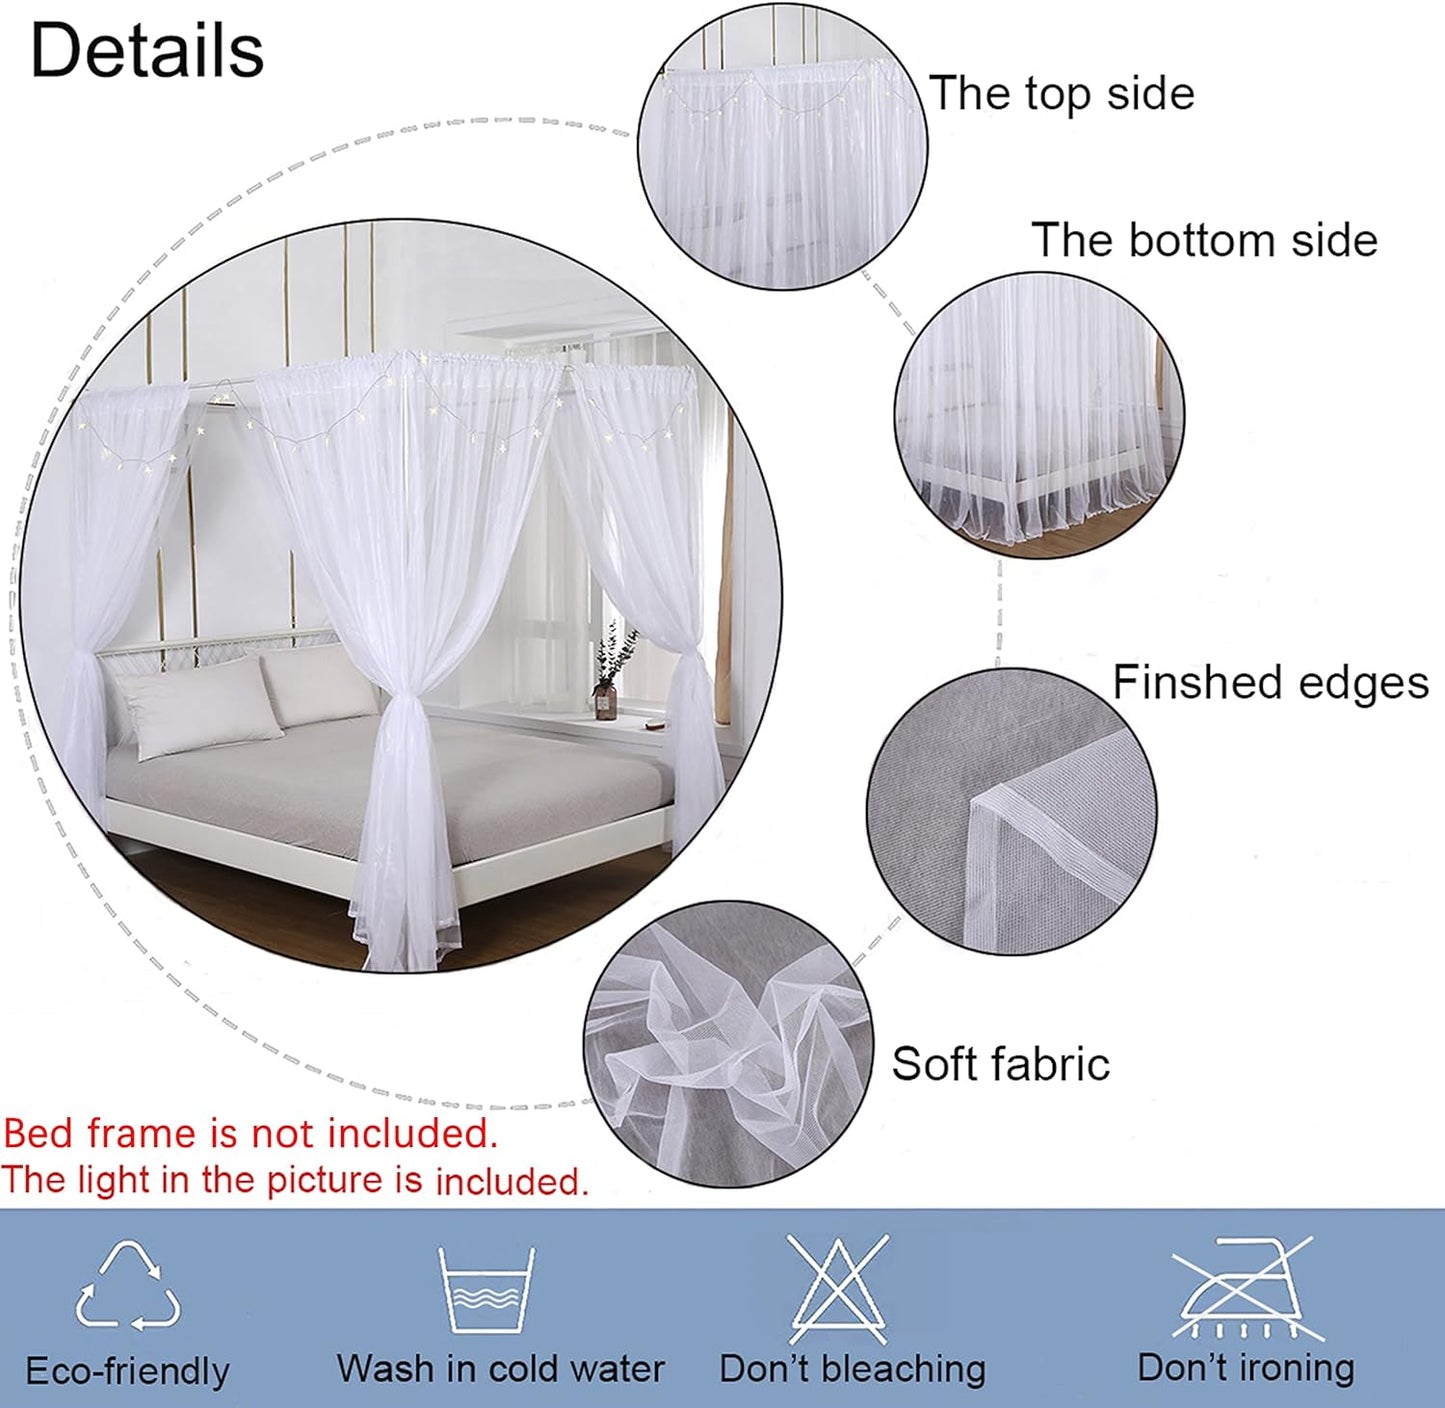 Akiky Princess Canopy Bed Curtains Bed Canopy Curtains with Lights for Queen Size Bed Drapes,8 Panels Canopies with 2 Lights,Room Décor (Full/Queen, White)  Akiky   